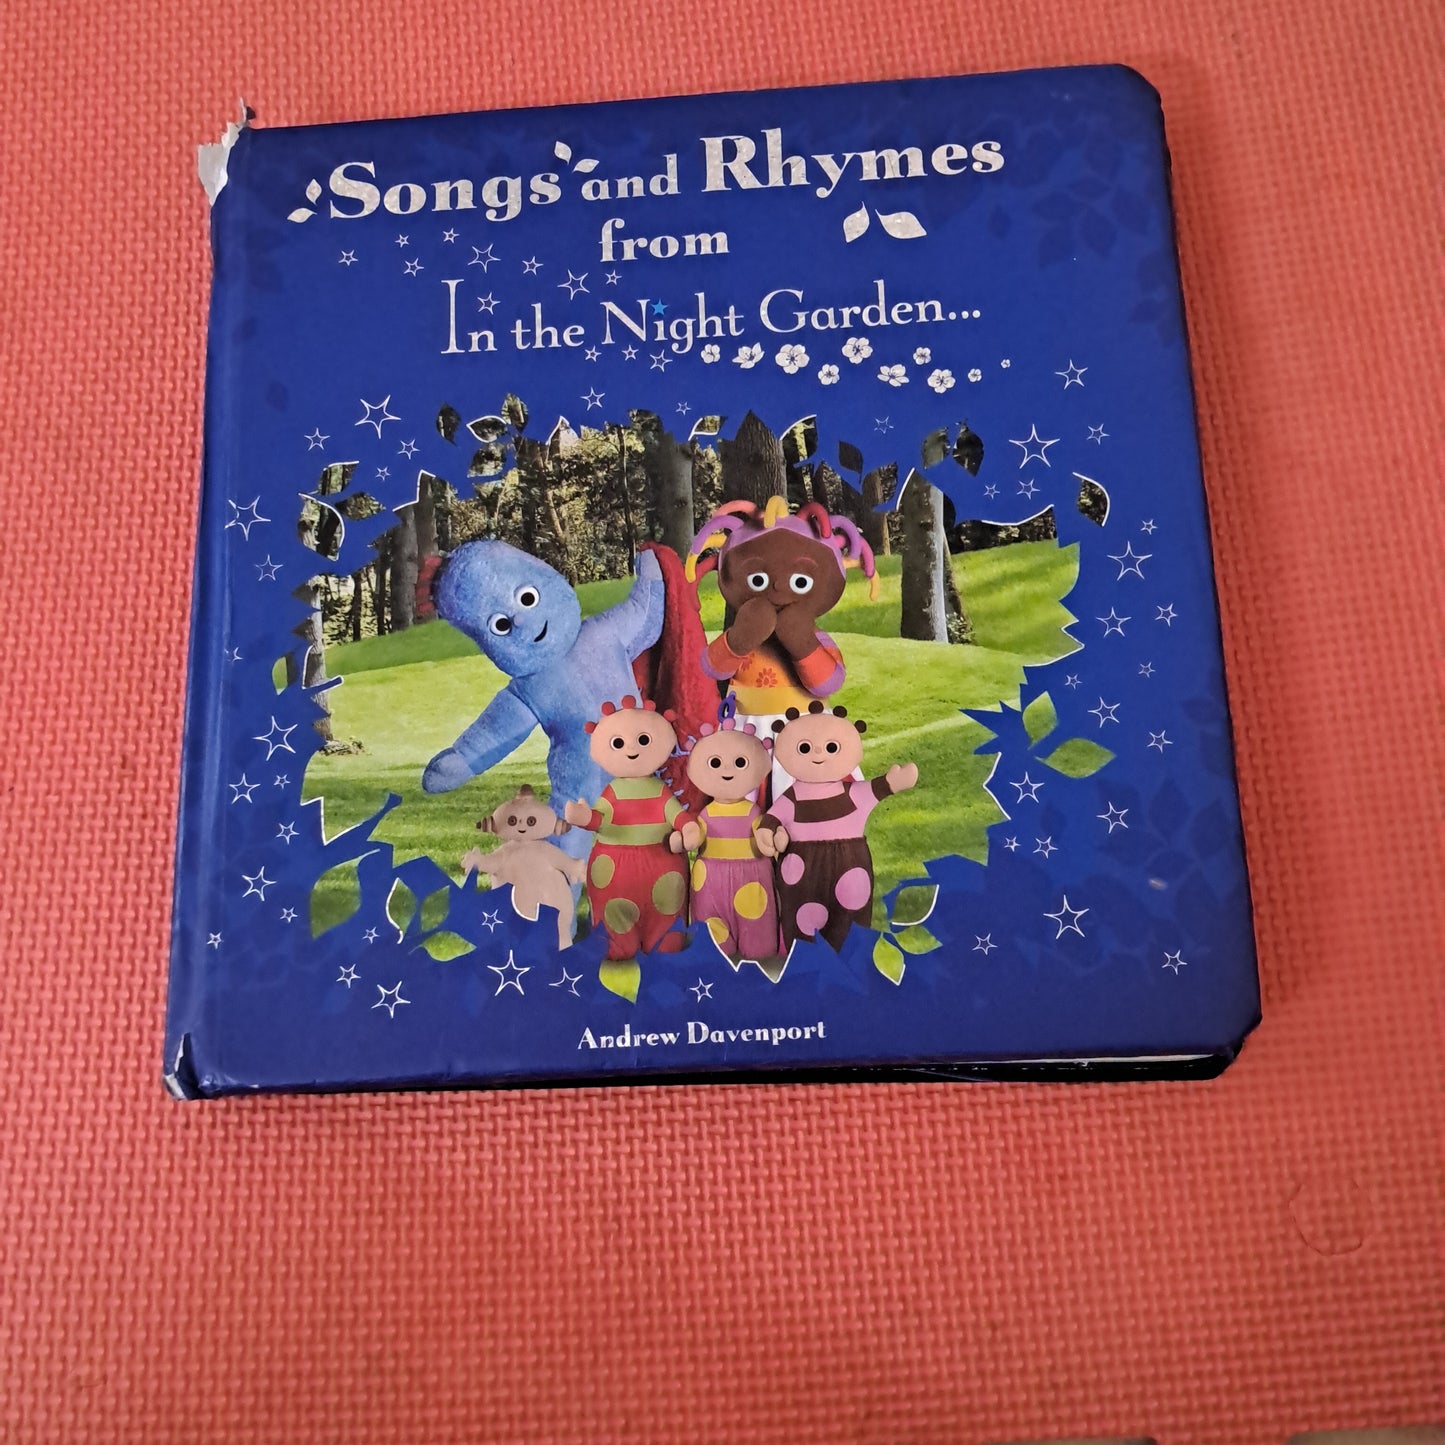 Songs and Rhymes From In the Night Garden….